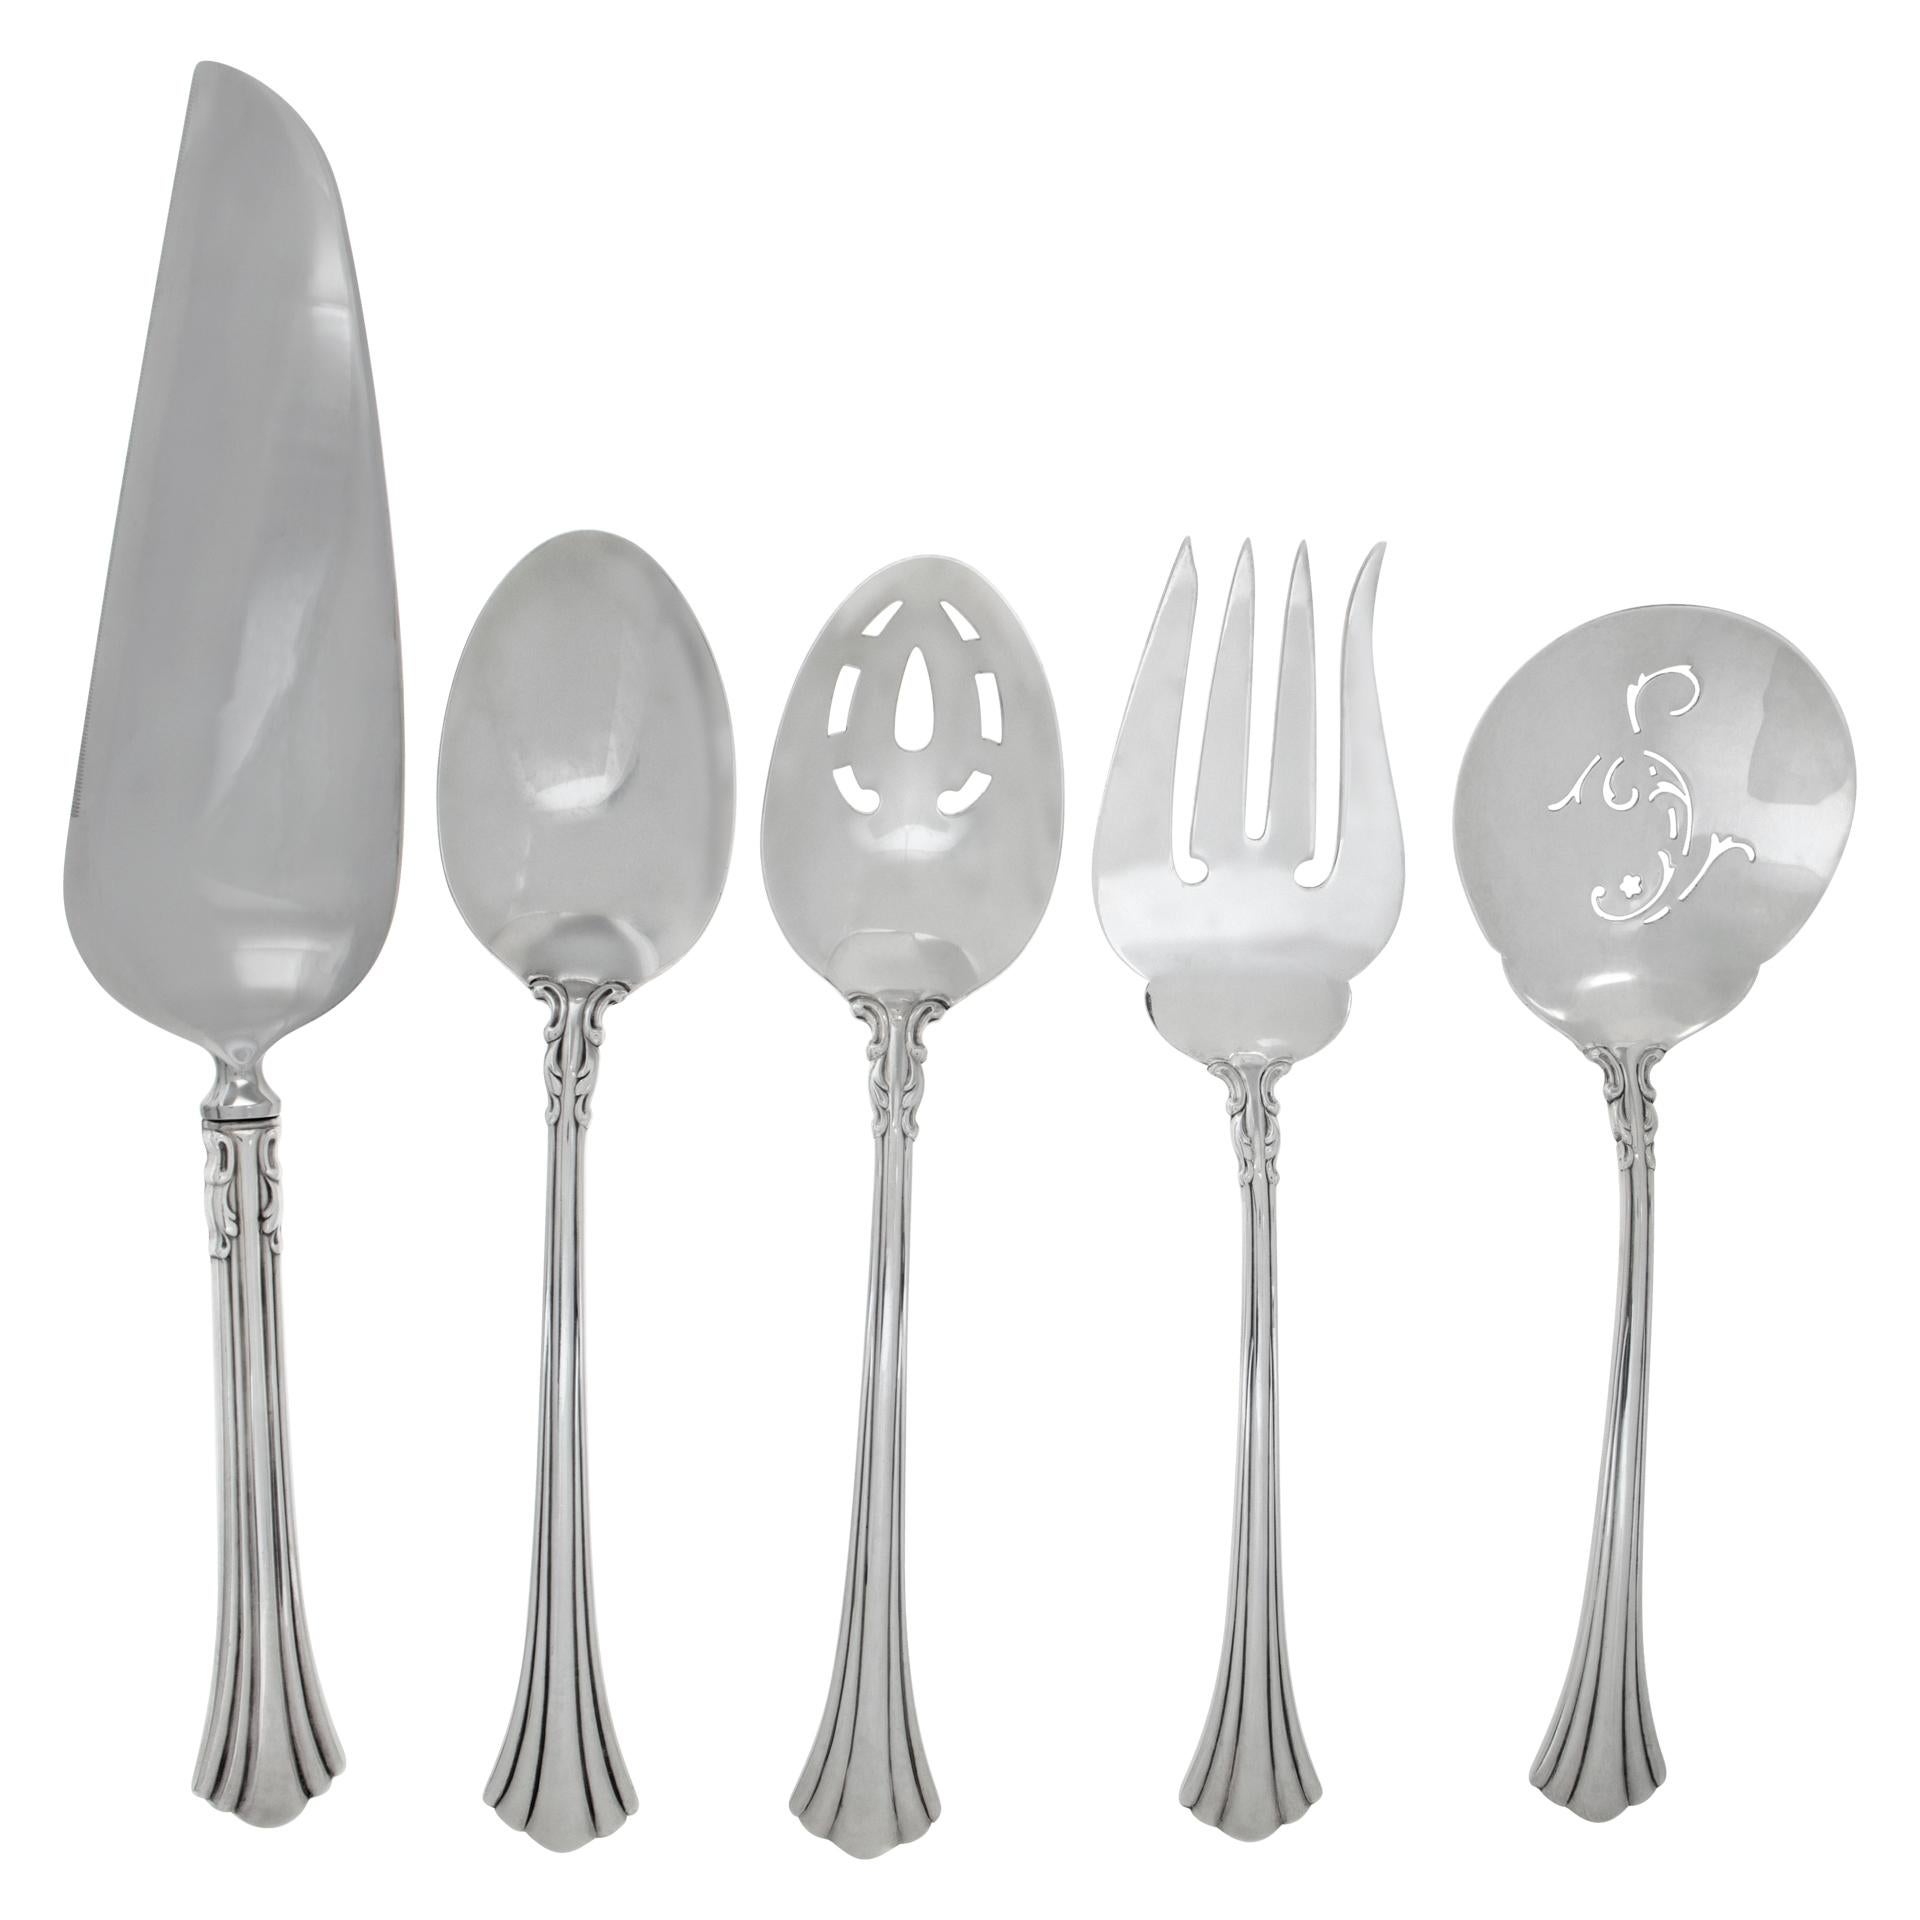 EIGHTEEN CENTURY sterling silver flatware set patented in 1971 by Reed & Barton In Excellent Condition For Sale In Surfside, FL